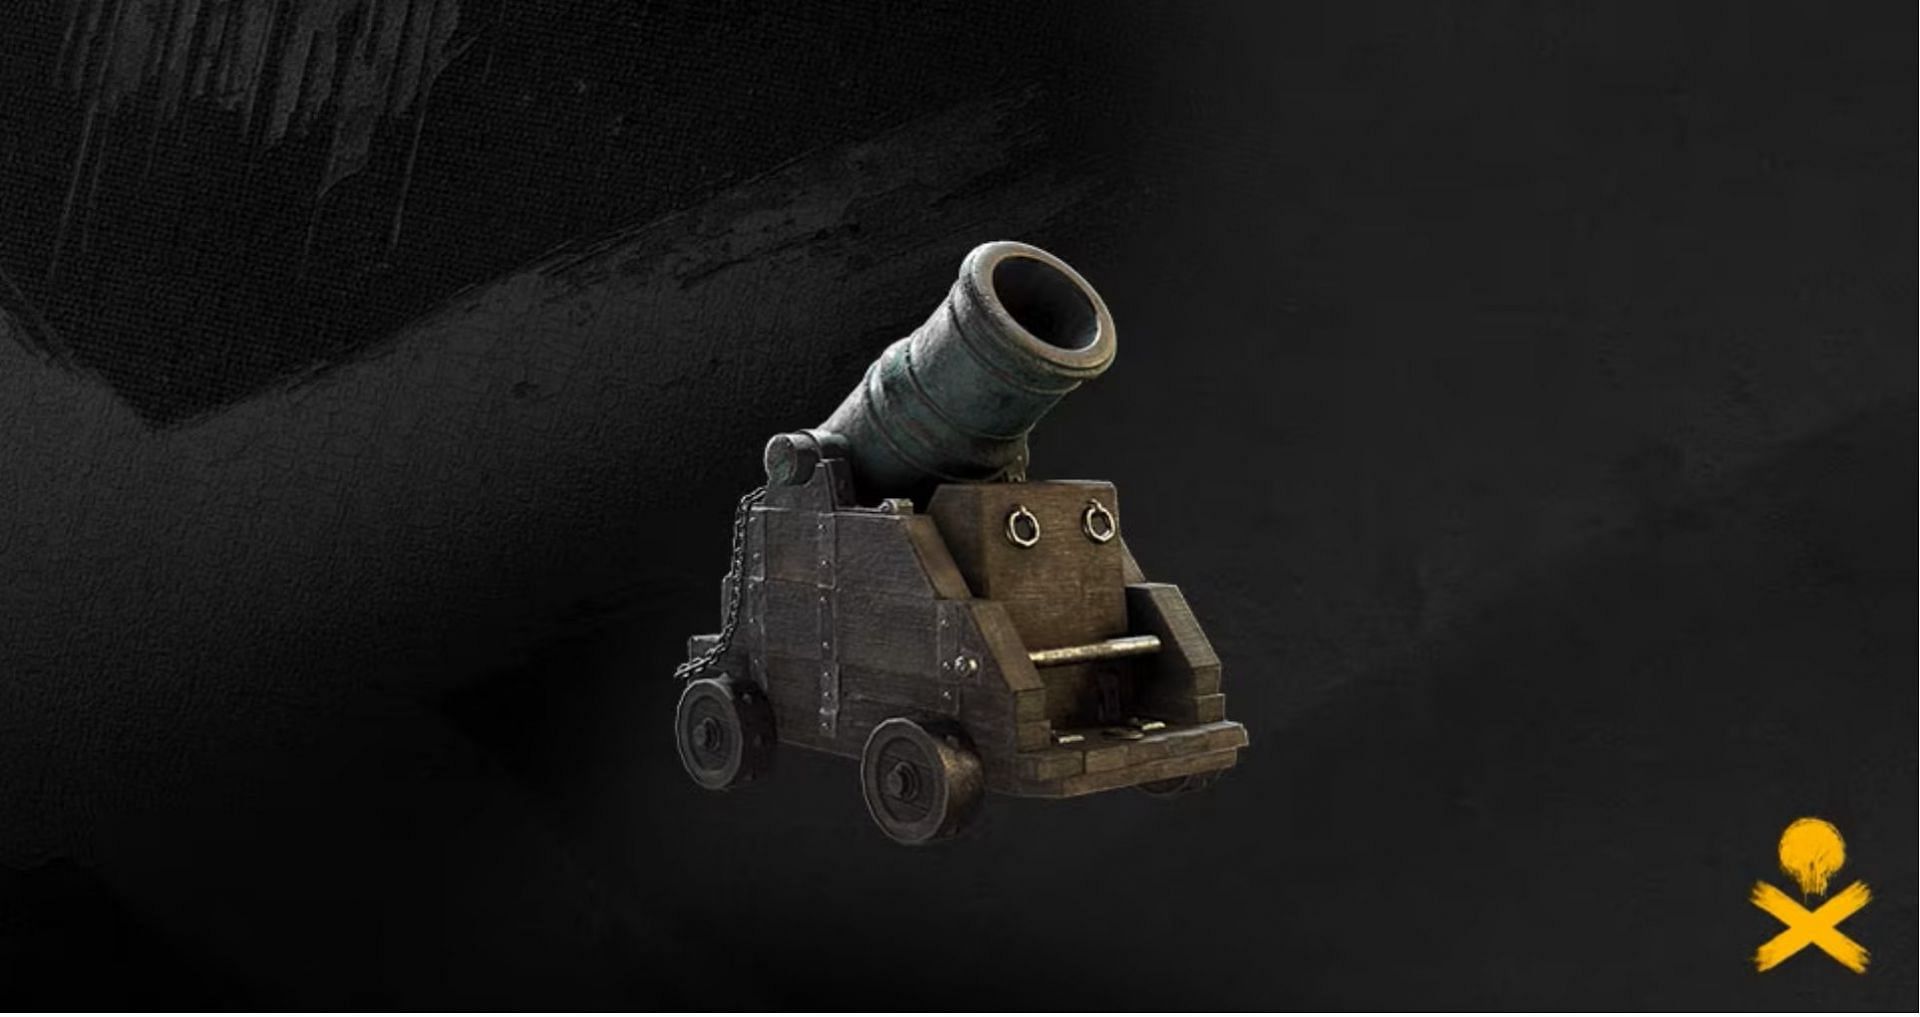 Bombard is an A-tier Top Deck weapon (Image via Ubisoft)